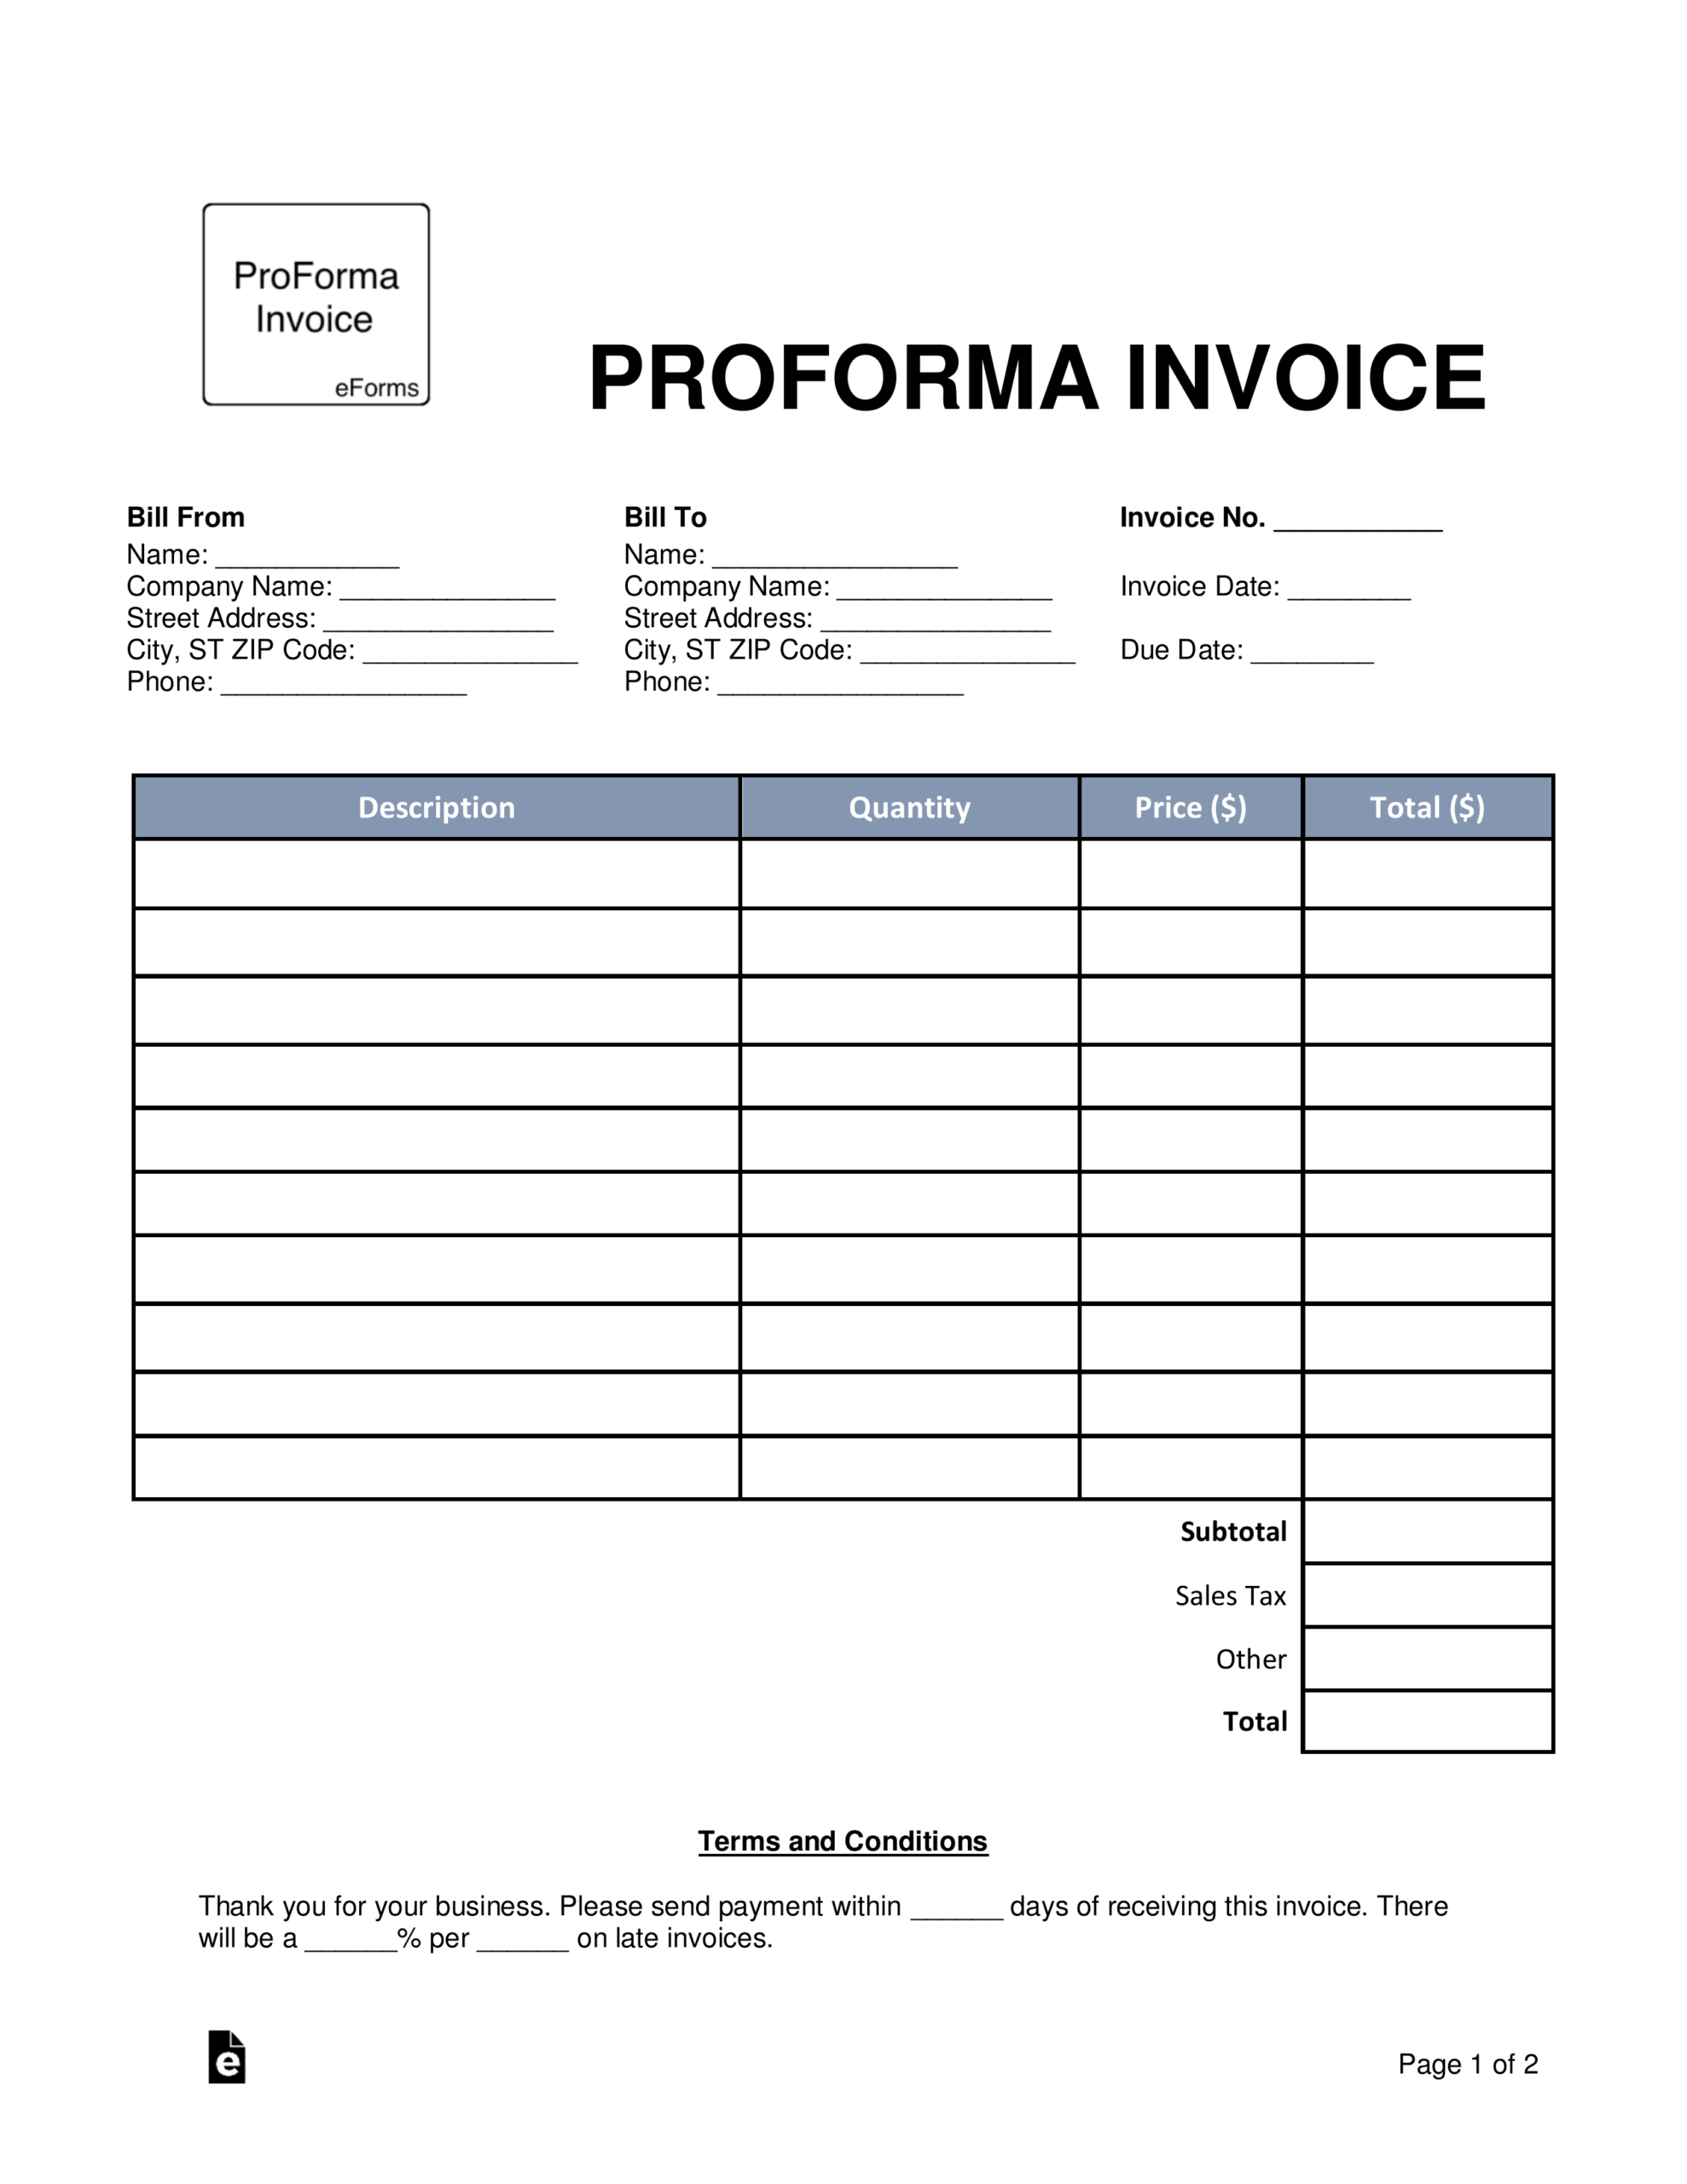 Blank Proforma Invoice - Zohre.horizonconsulting.co Throughout Free Proforma Invoice Template Word